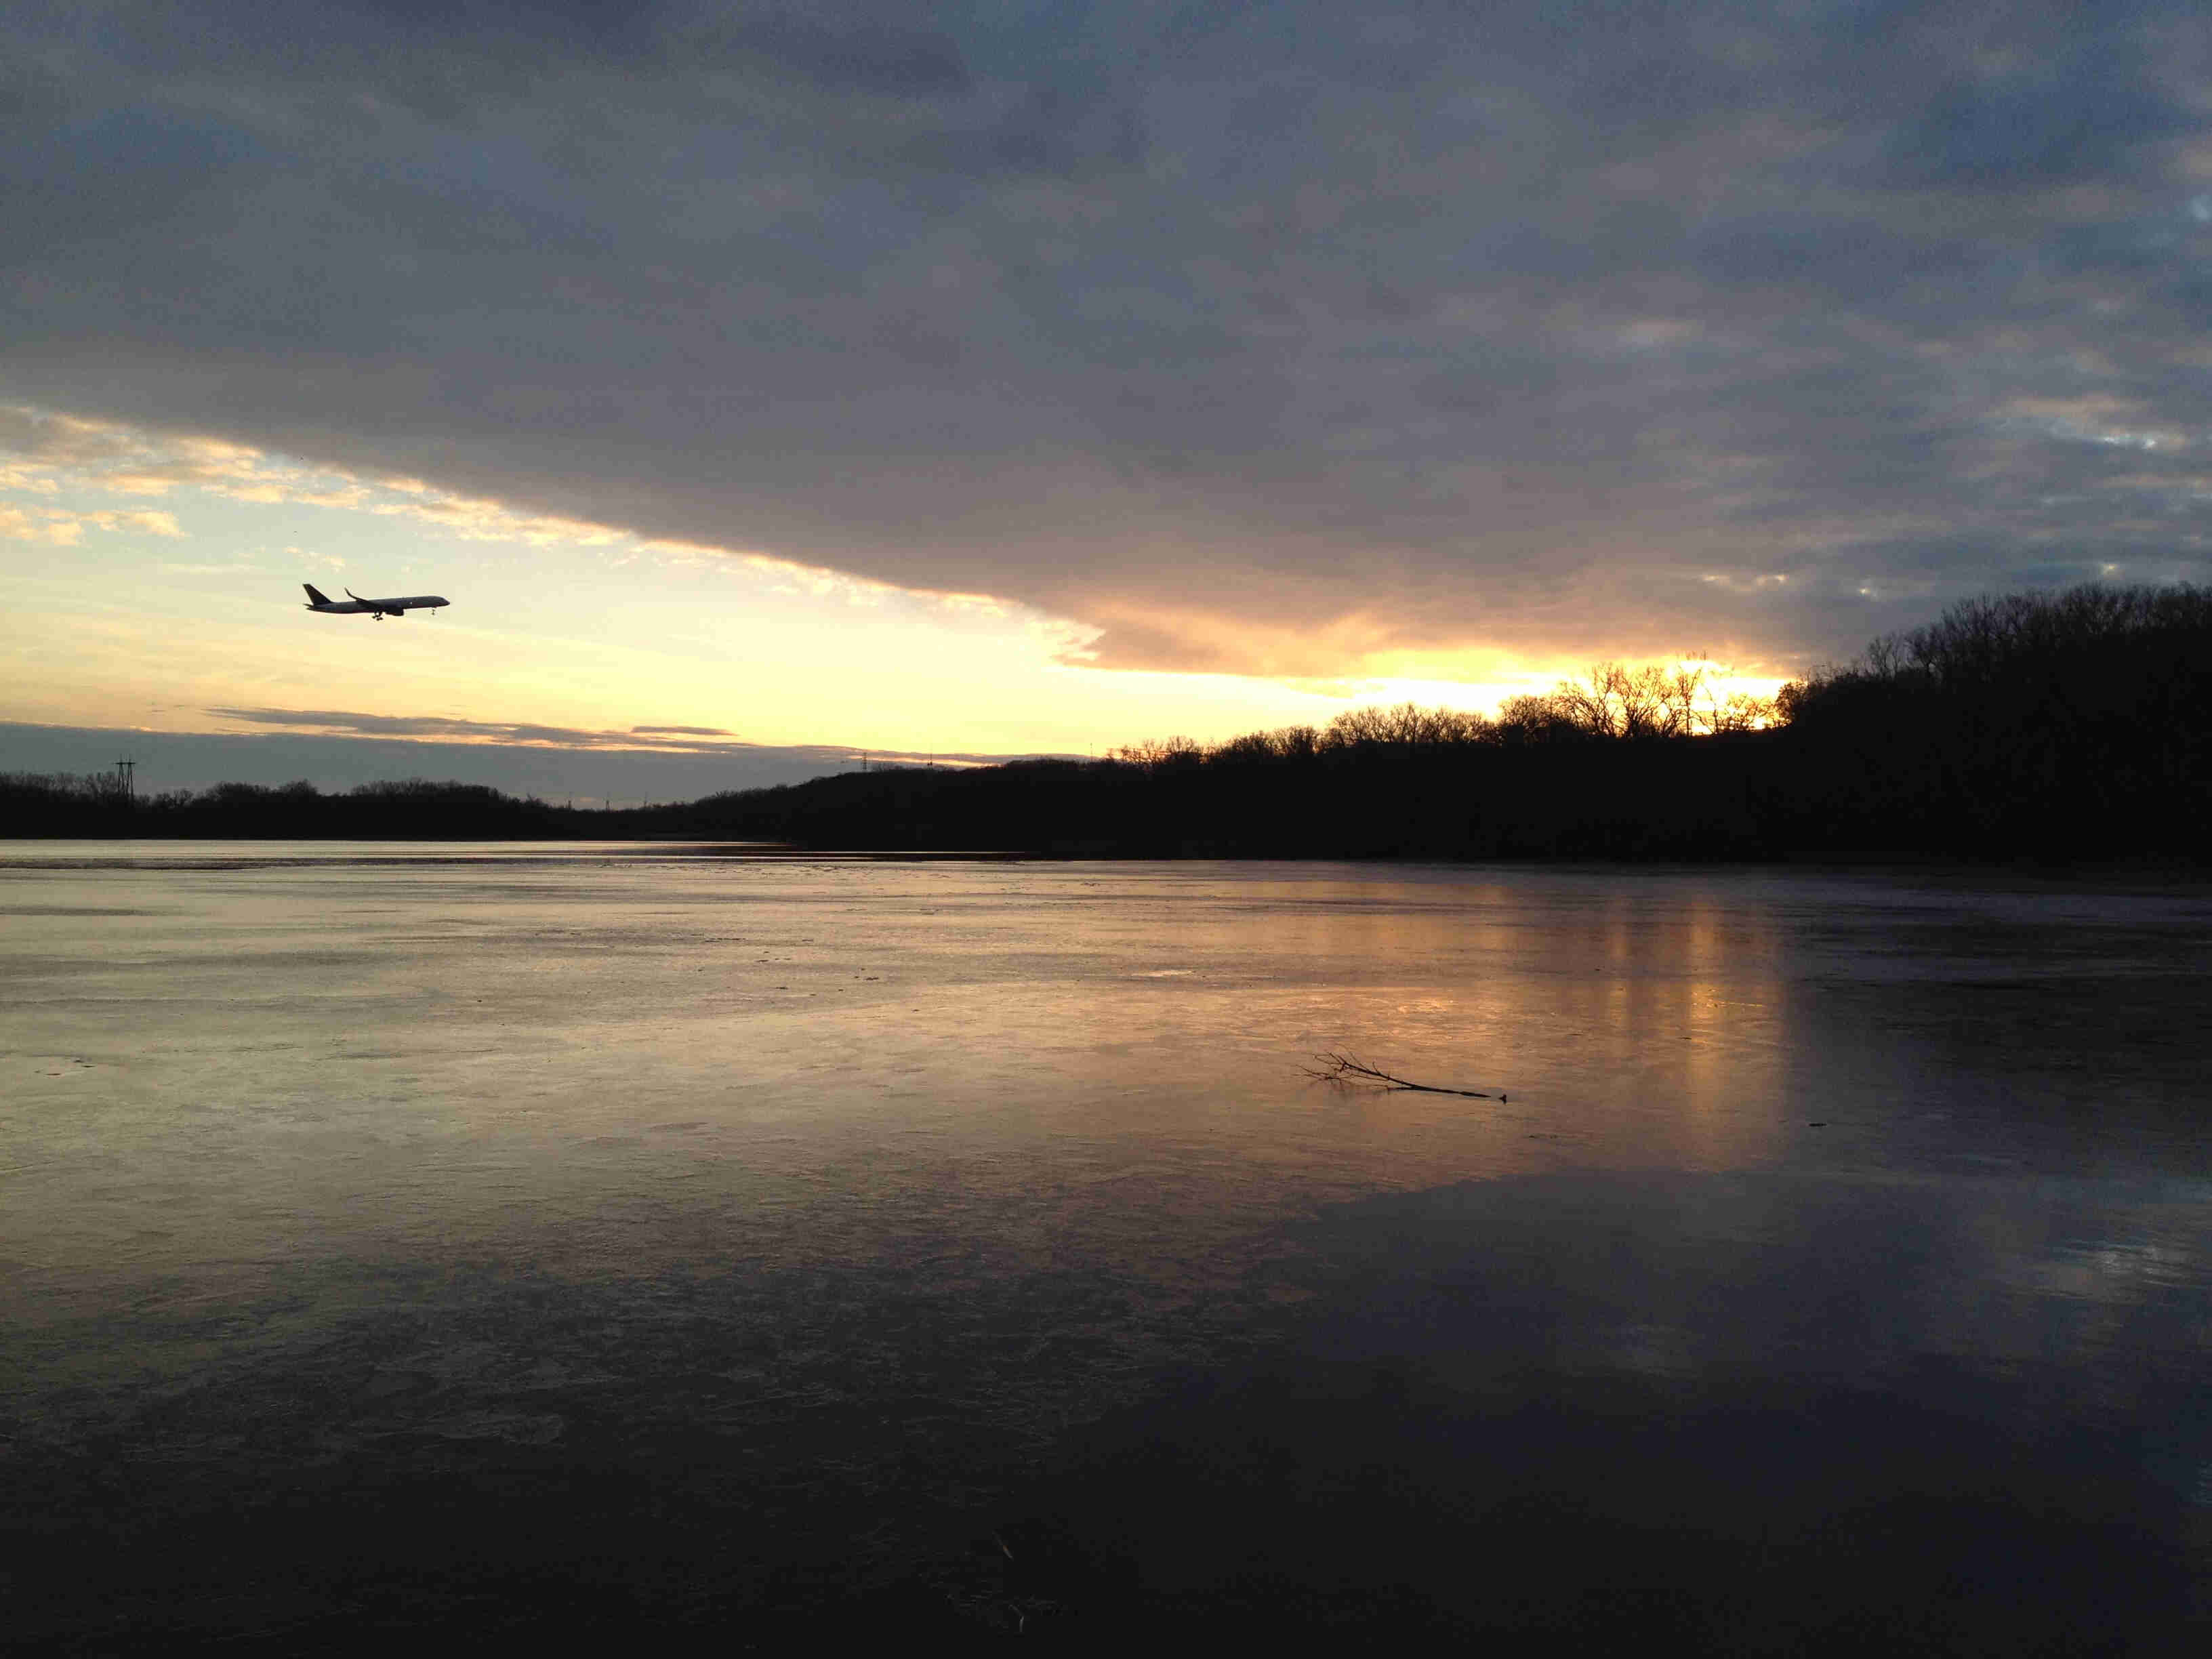 A frozen lake with bare tree around it, with the sun on the horizon and a passenger jet flying across